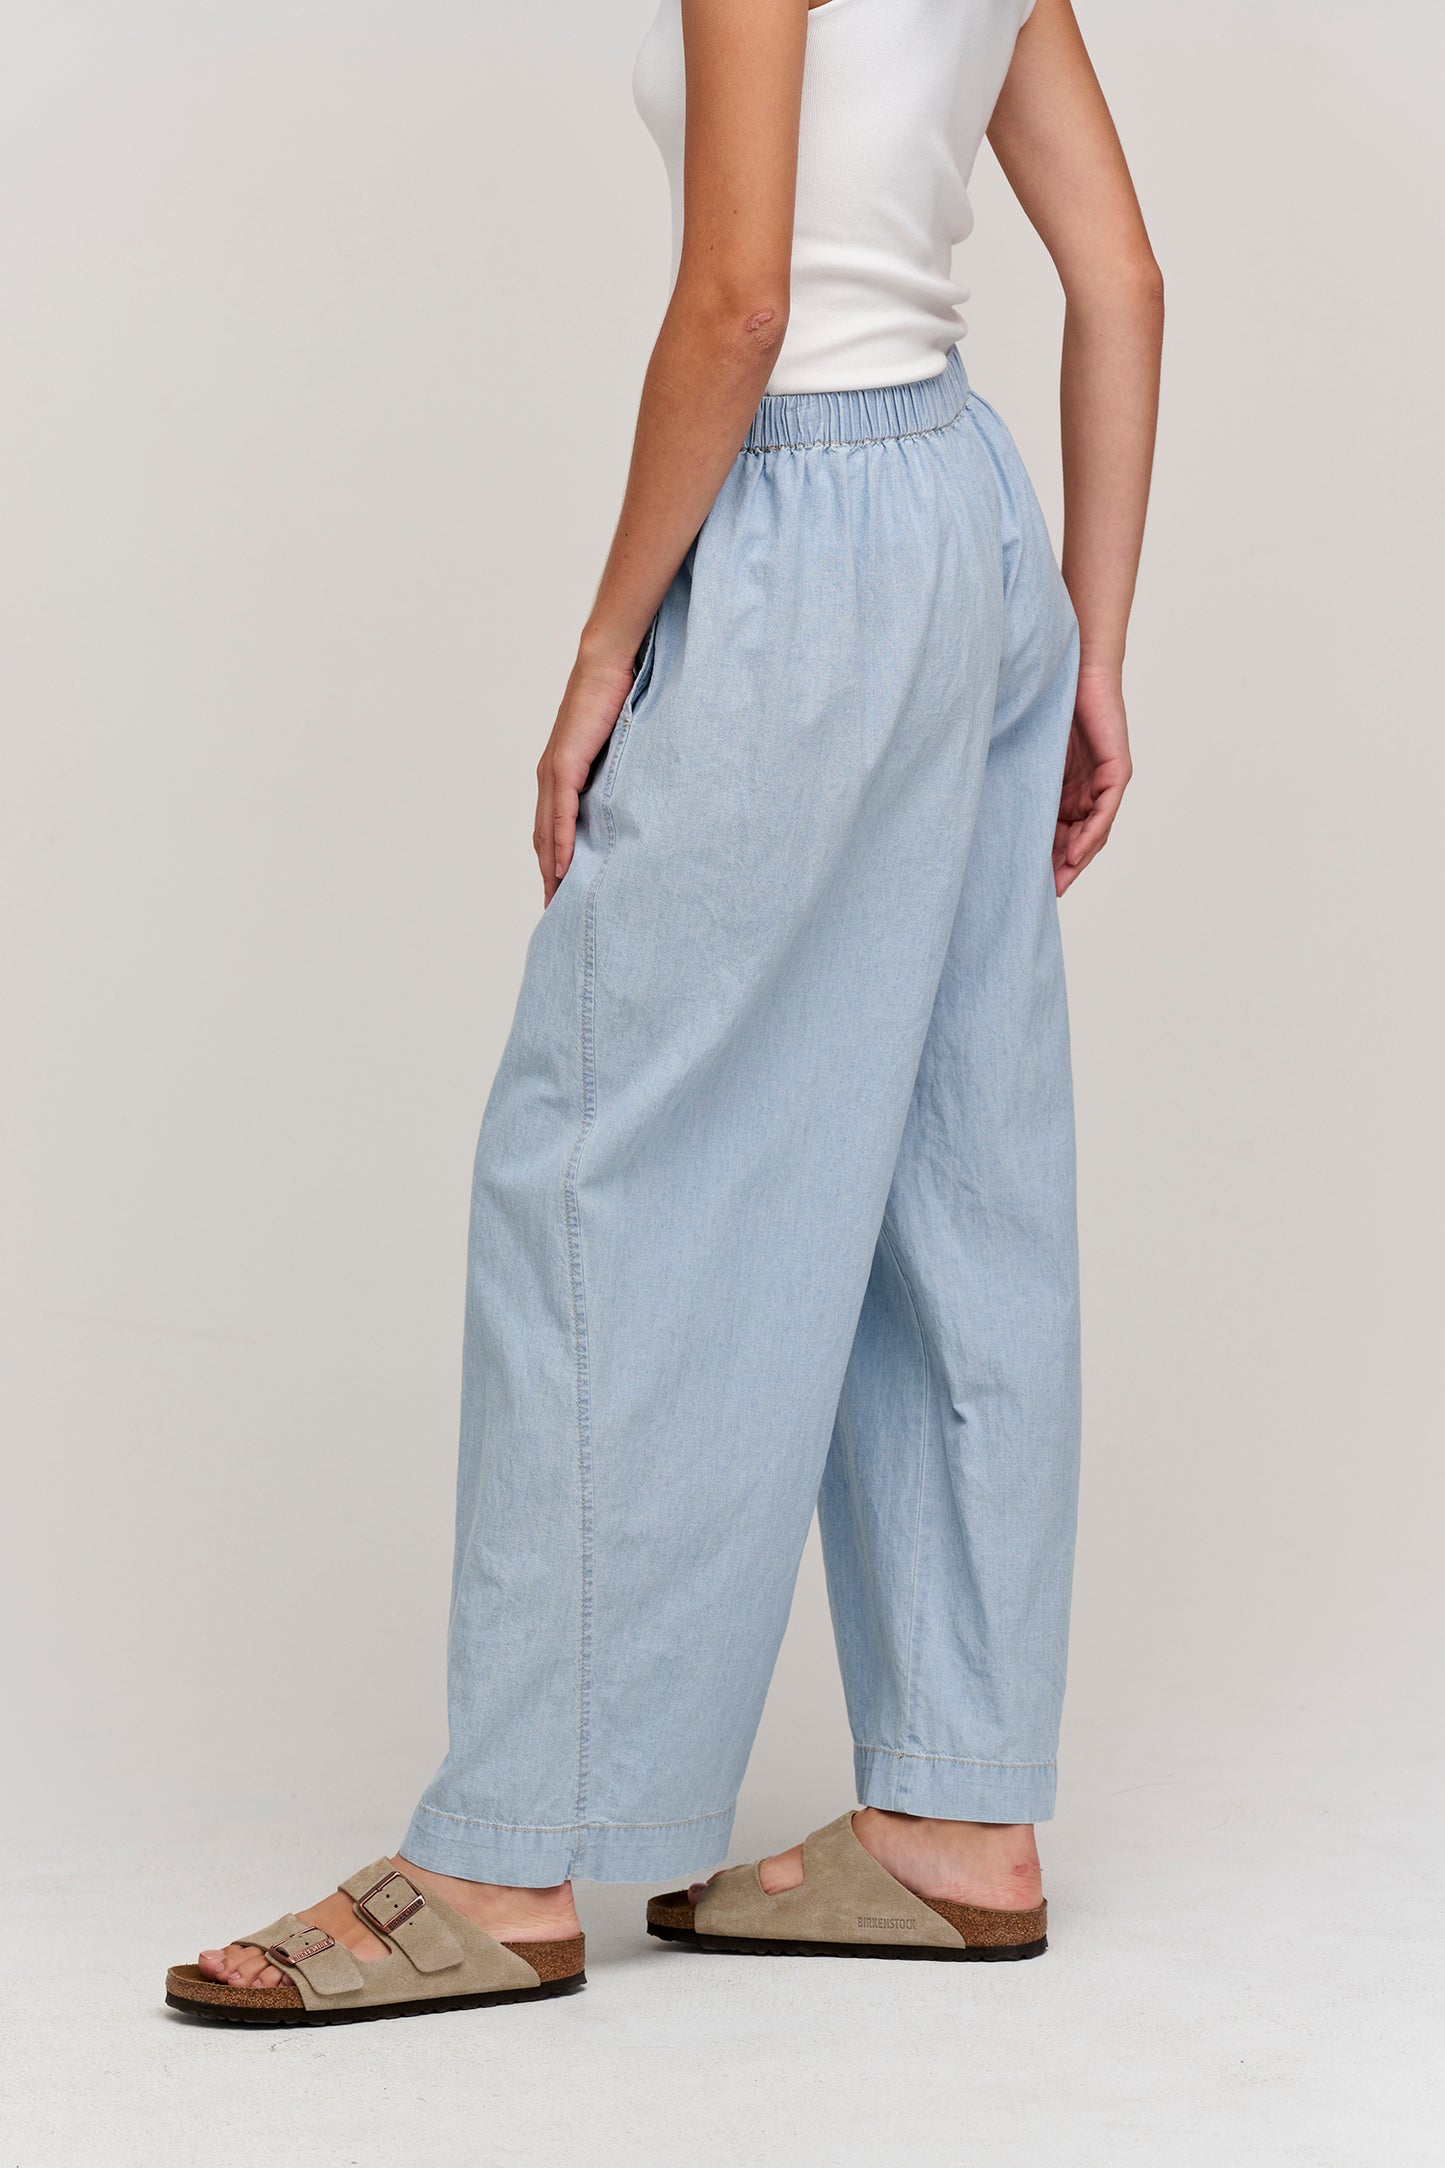 BROOKLYN CHAMBRAY WIDE LEG PANT IN CHAMBRAY